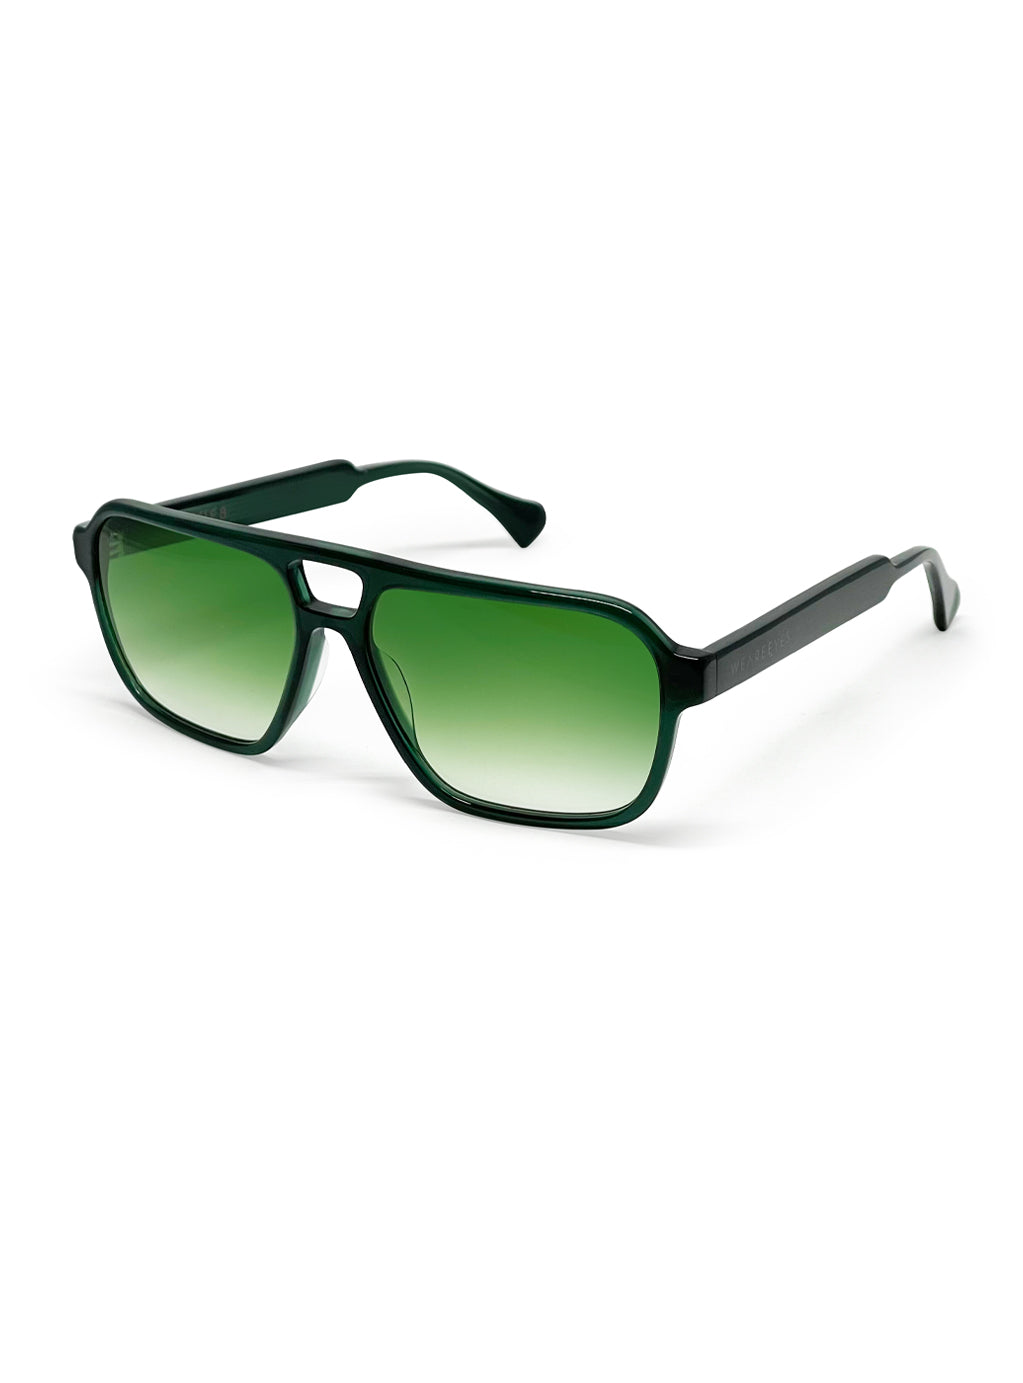 Double-B  Green with Green Gradient Lenses